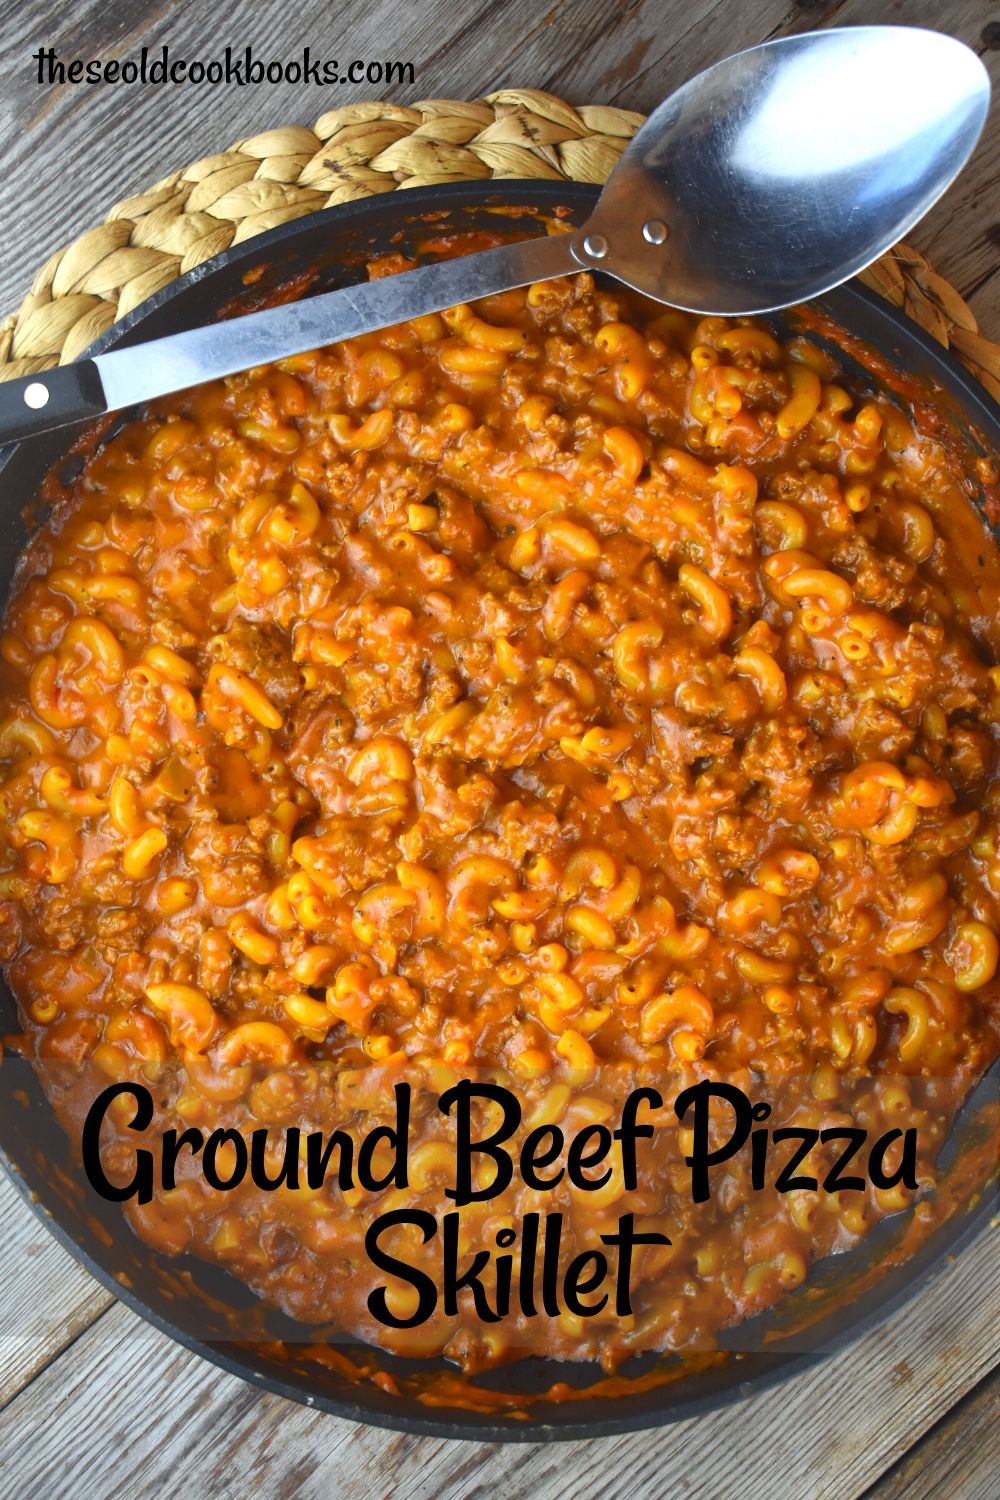 Ground beef pizza skillet is an easy stovetop recipe that you can have on the table in under 30 minutes.